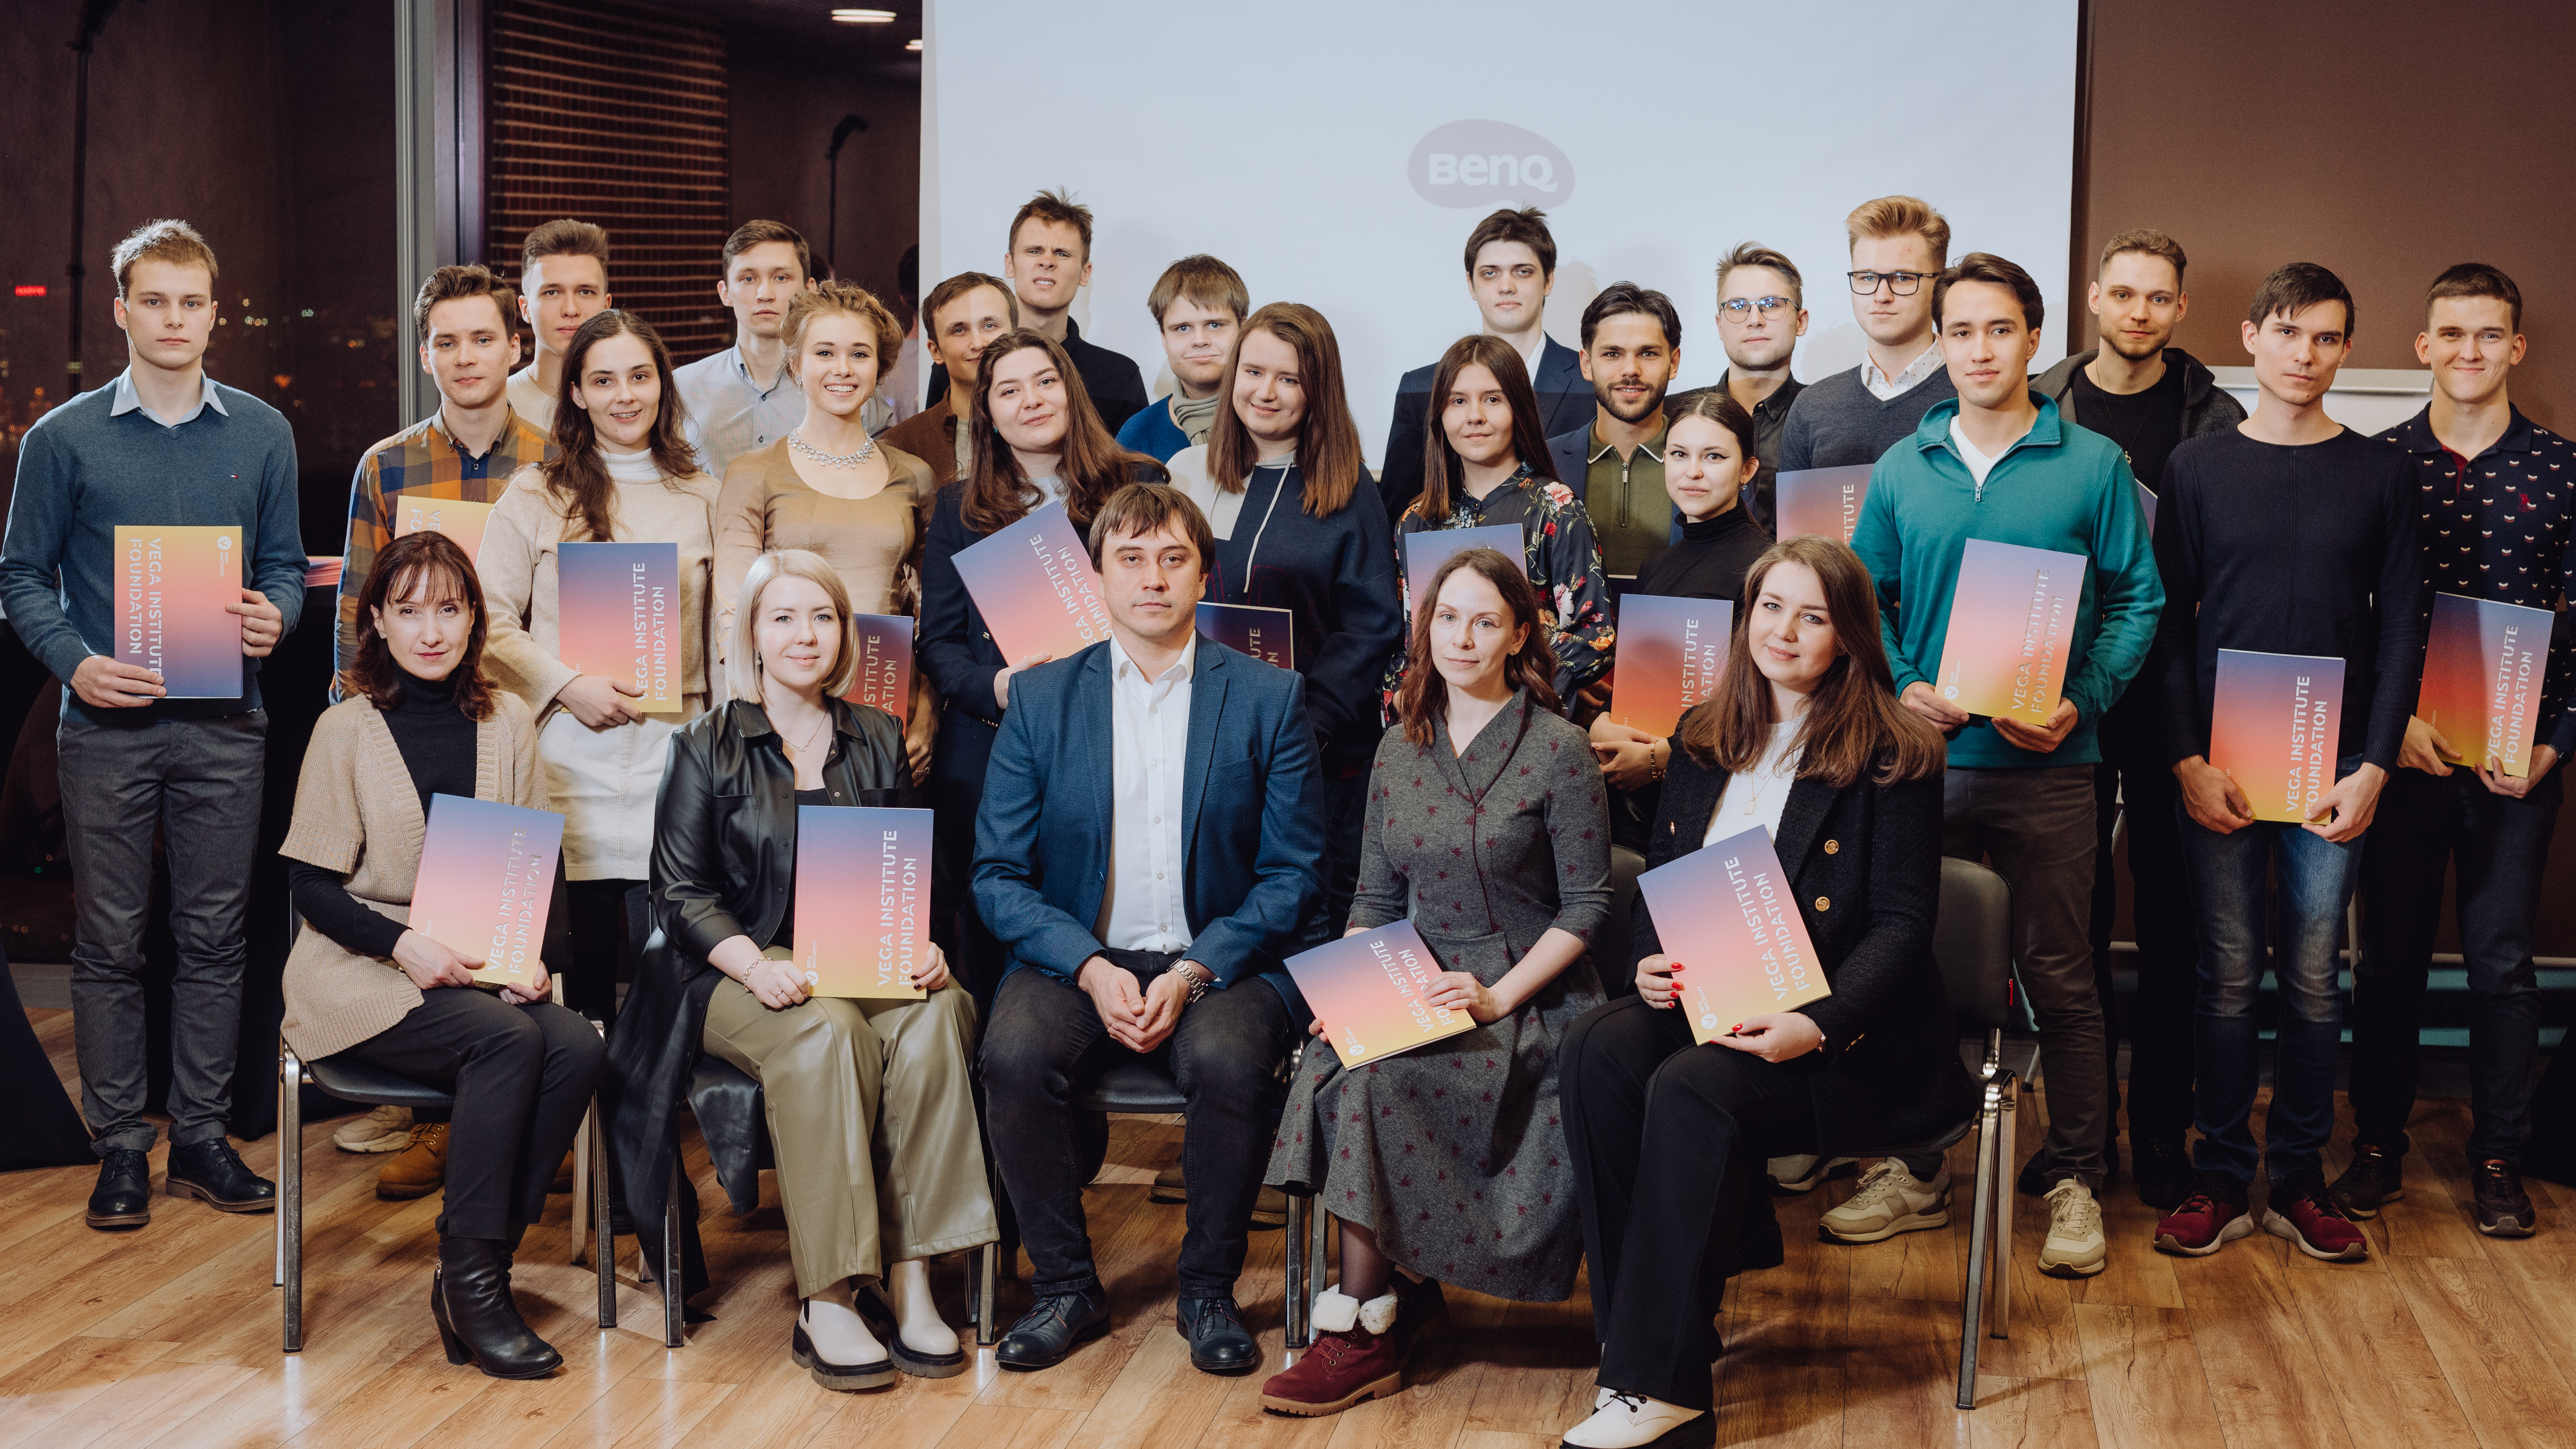 Meeting of the Foundation’s scholarship recipients took place in Moscow City